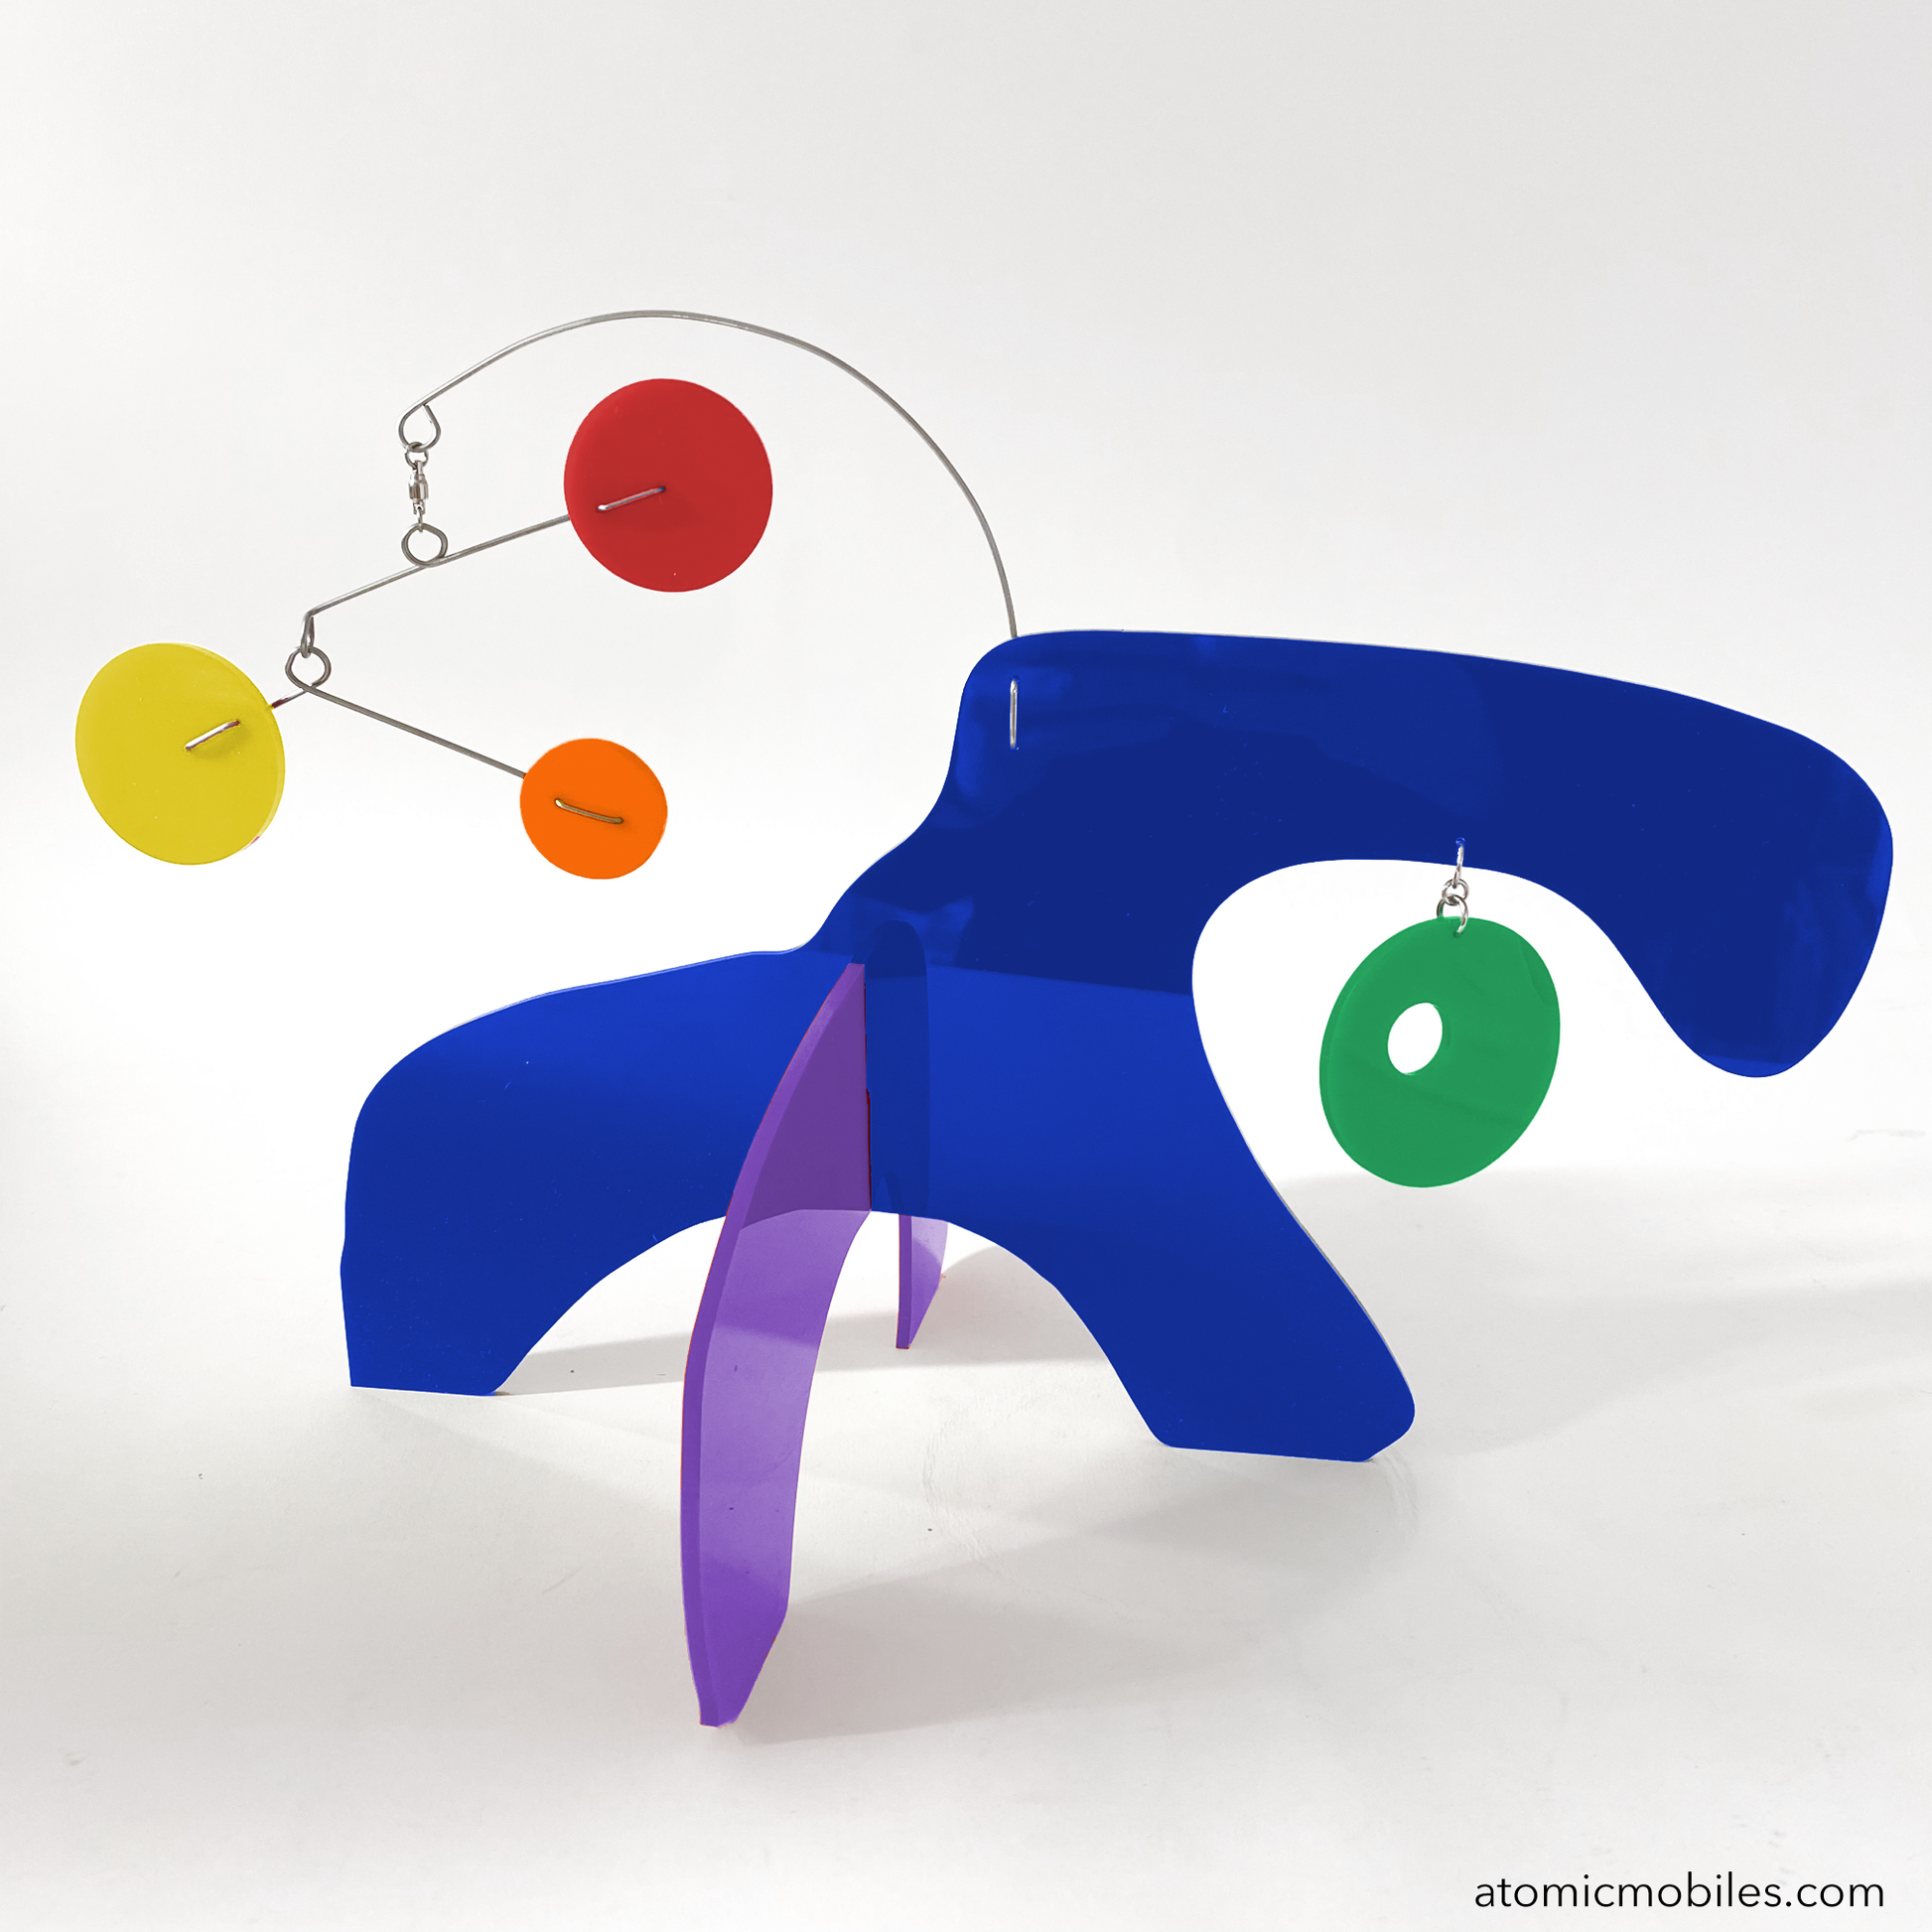 KinetiCats Collection Turtle in Rainbow Pride colors of Navy Blue, Purple, Green, Red, Yellow, Orange - one of 12 Modern Cute Abstract Animal Art Sculpture Kinetic Stabiles inspired by Dada and mid century modern style art by AtomicMobiles.com